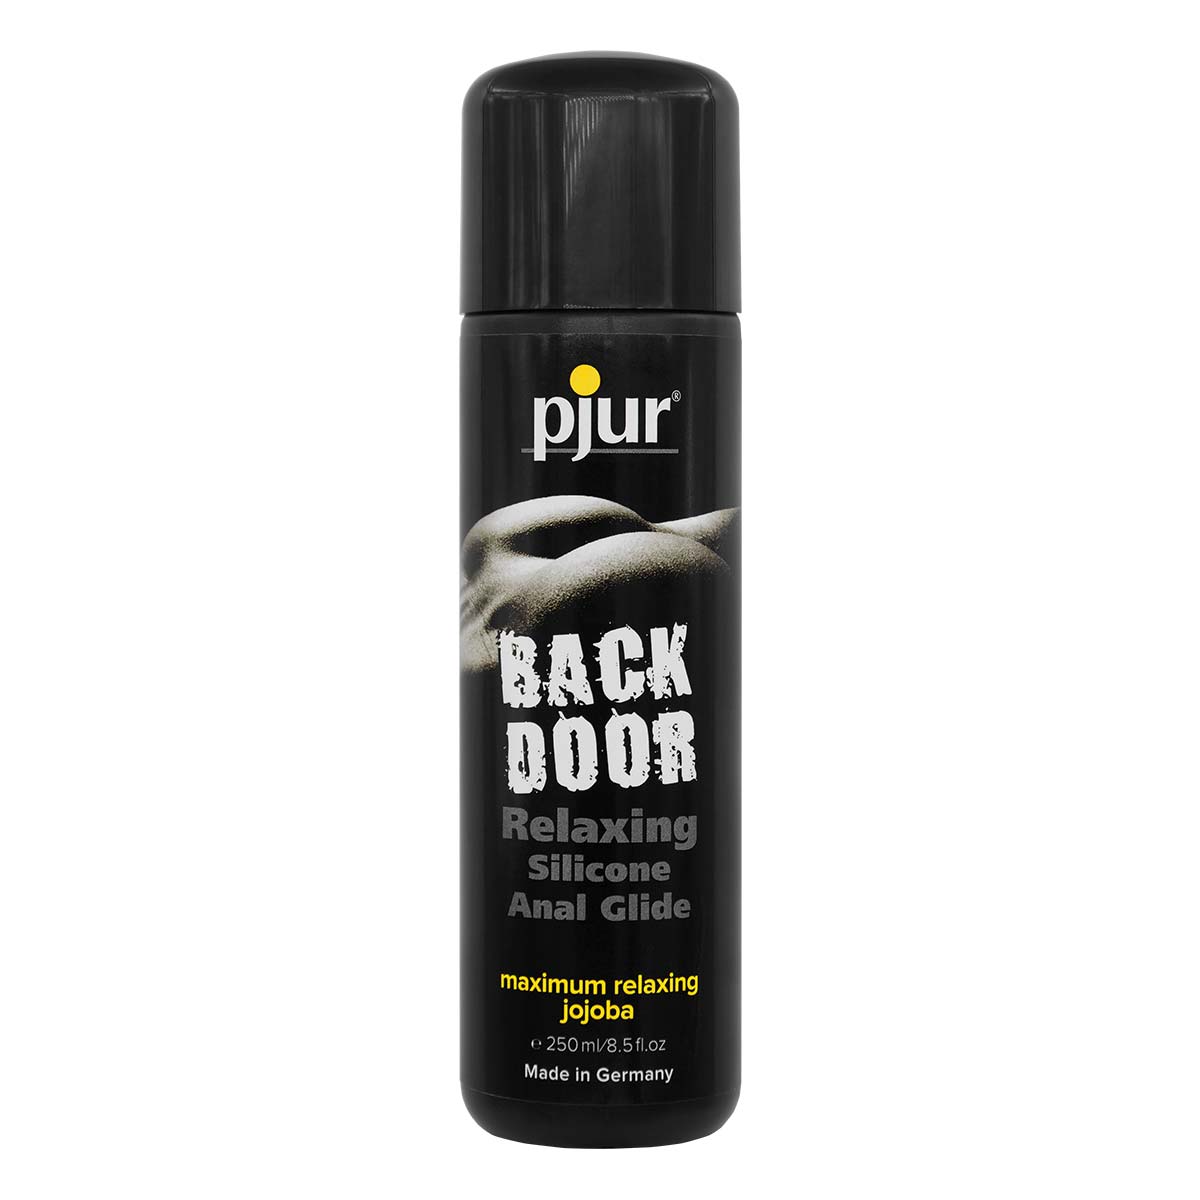 pjur BACK DOOR RELAXING Silicone Anal Glide 250ml Silicone-based Lubricant-p_2